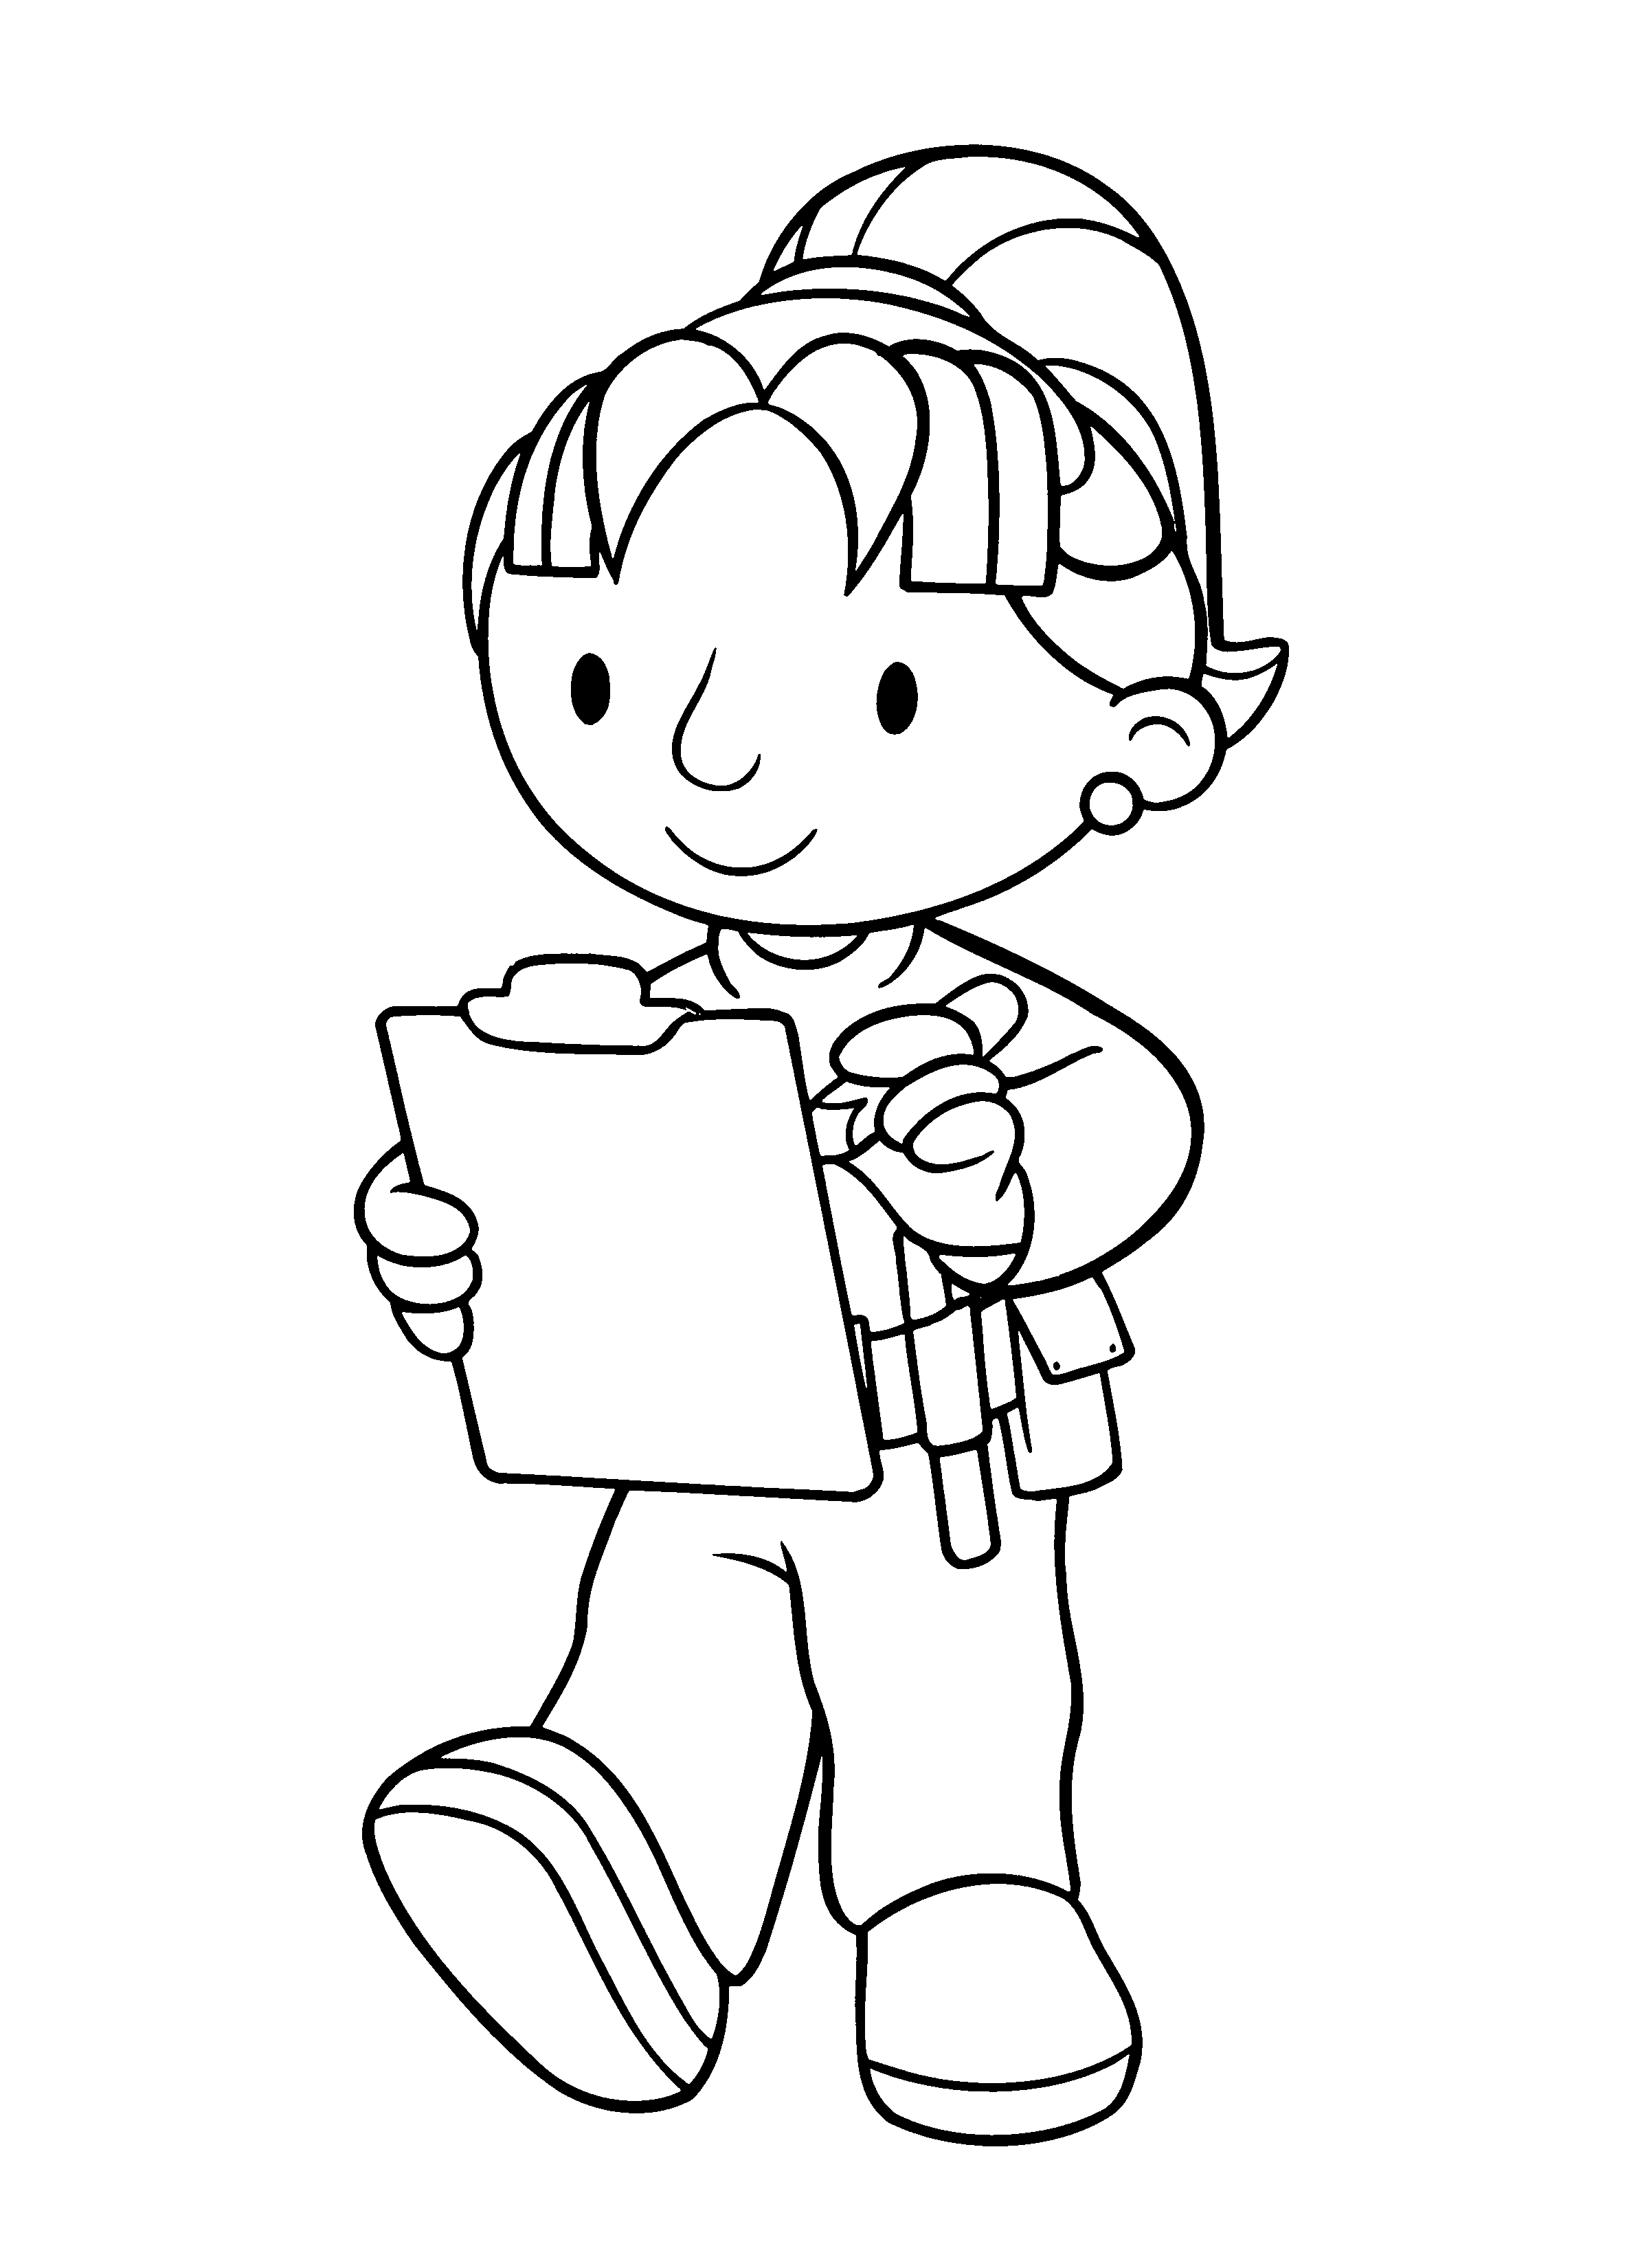 Coloring page: Can we fix it? (Cartoons) #33281 - Free Printable Coloring Pages